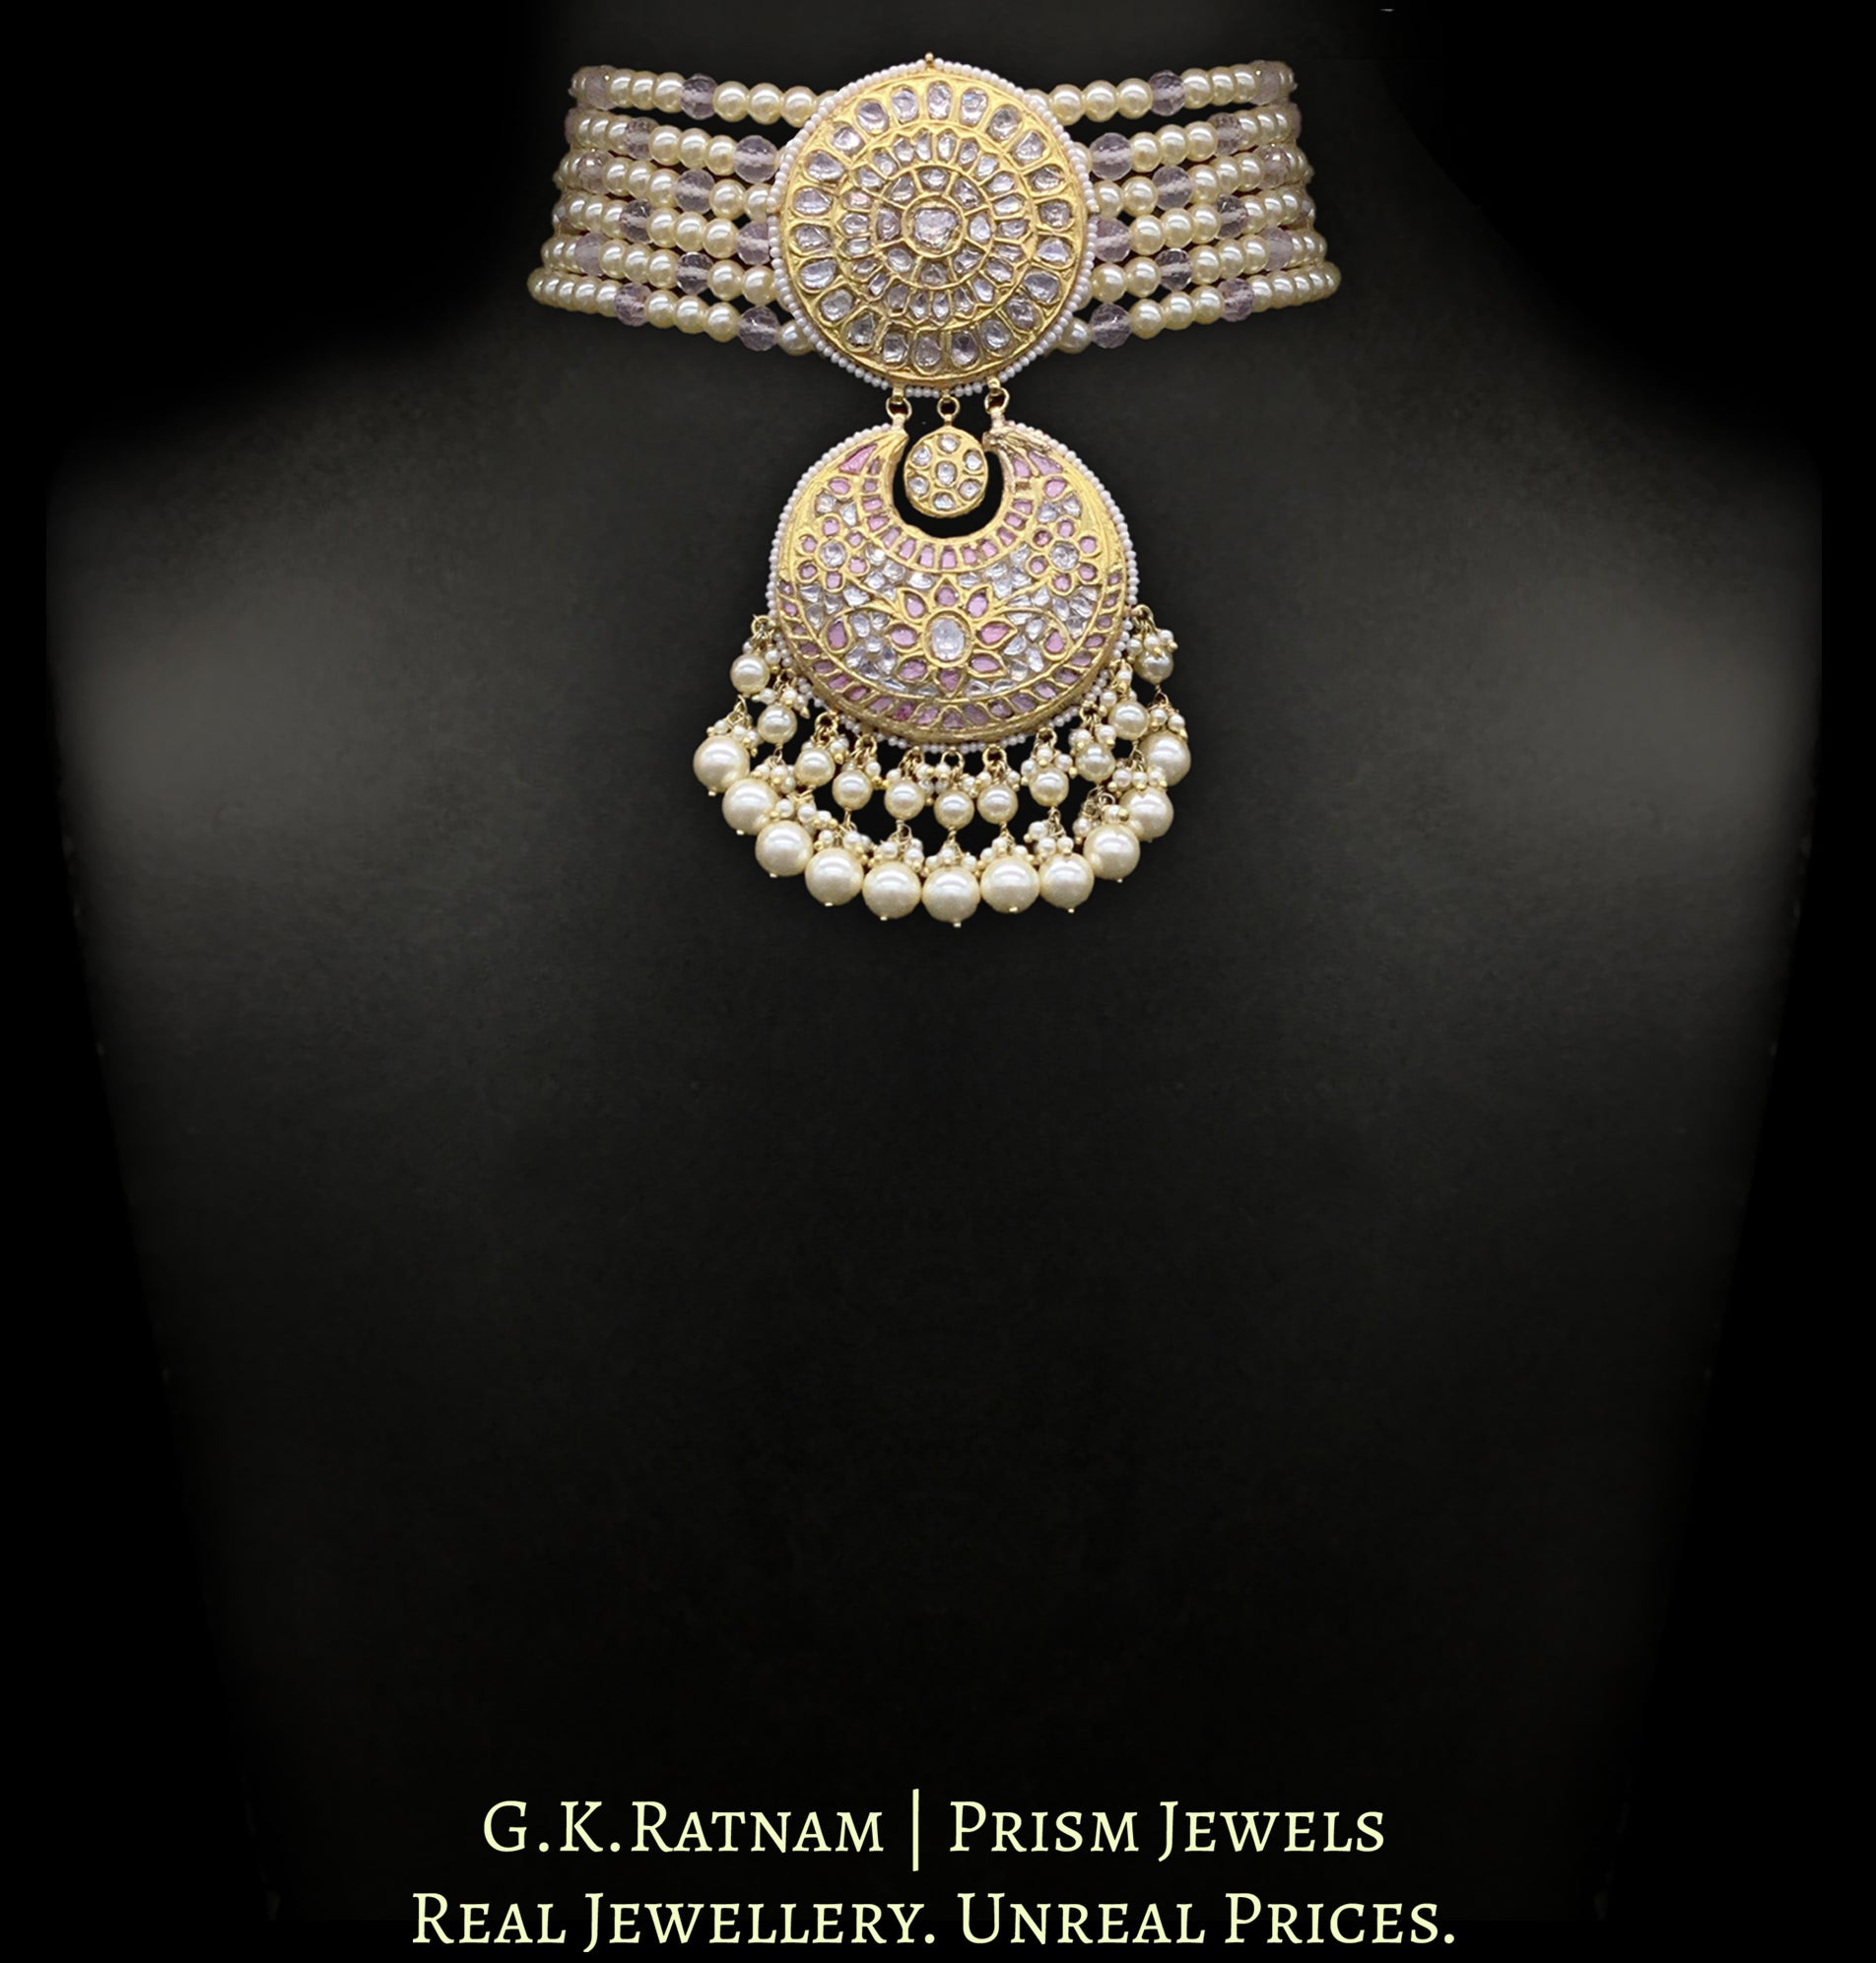 23k Gold and Diamond Polki Choker Necklace Set strung in lustrous Pearls and Rose Quartz beads